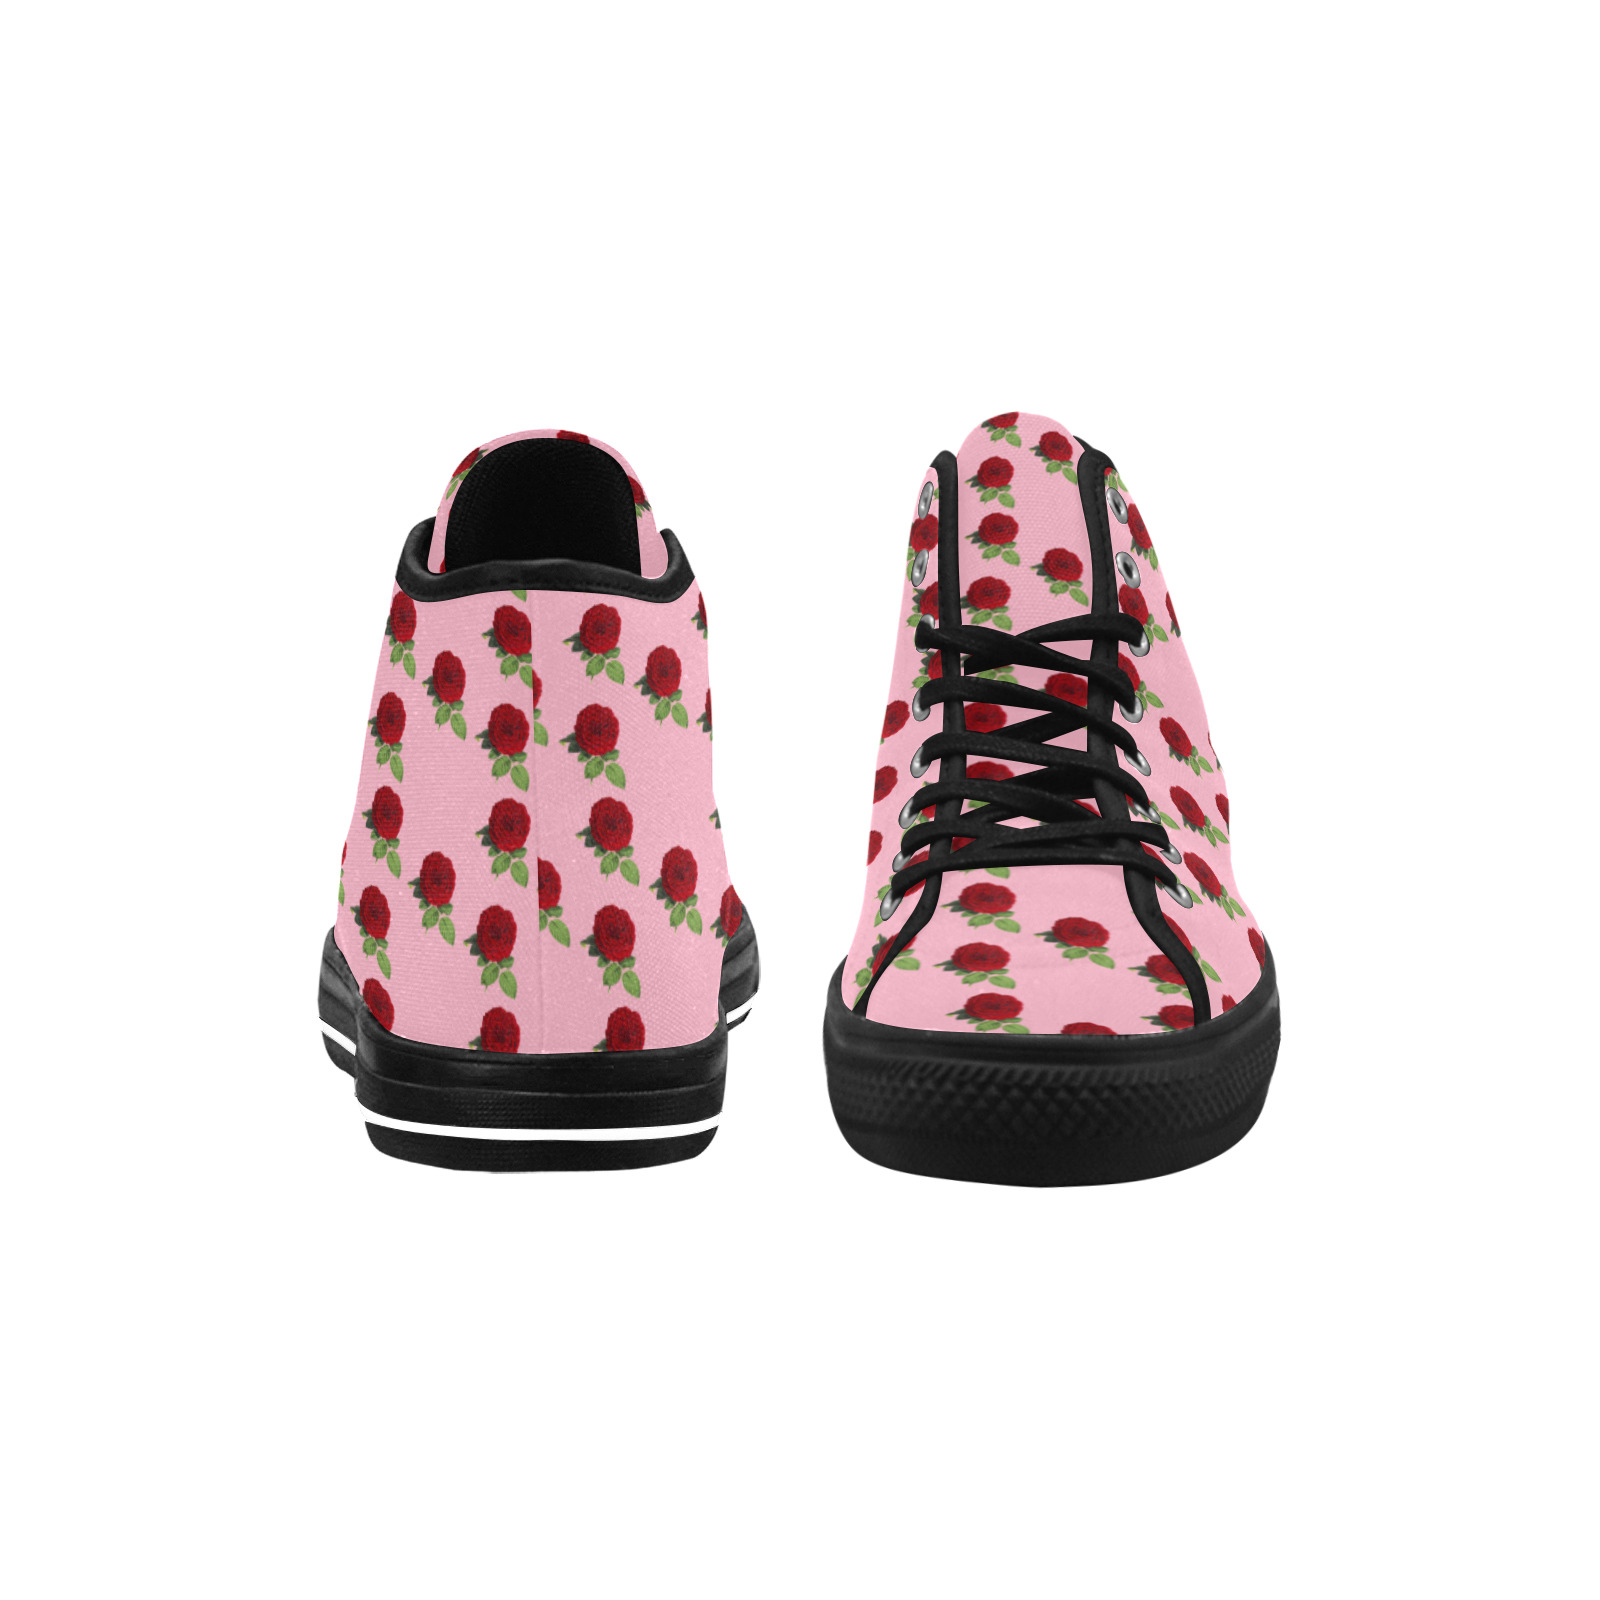 rose in pink Vancouver H Women's Canvas Shoes (1013-1)